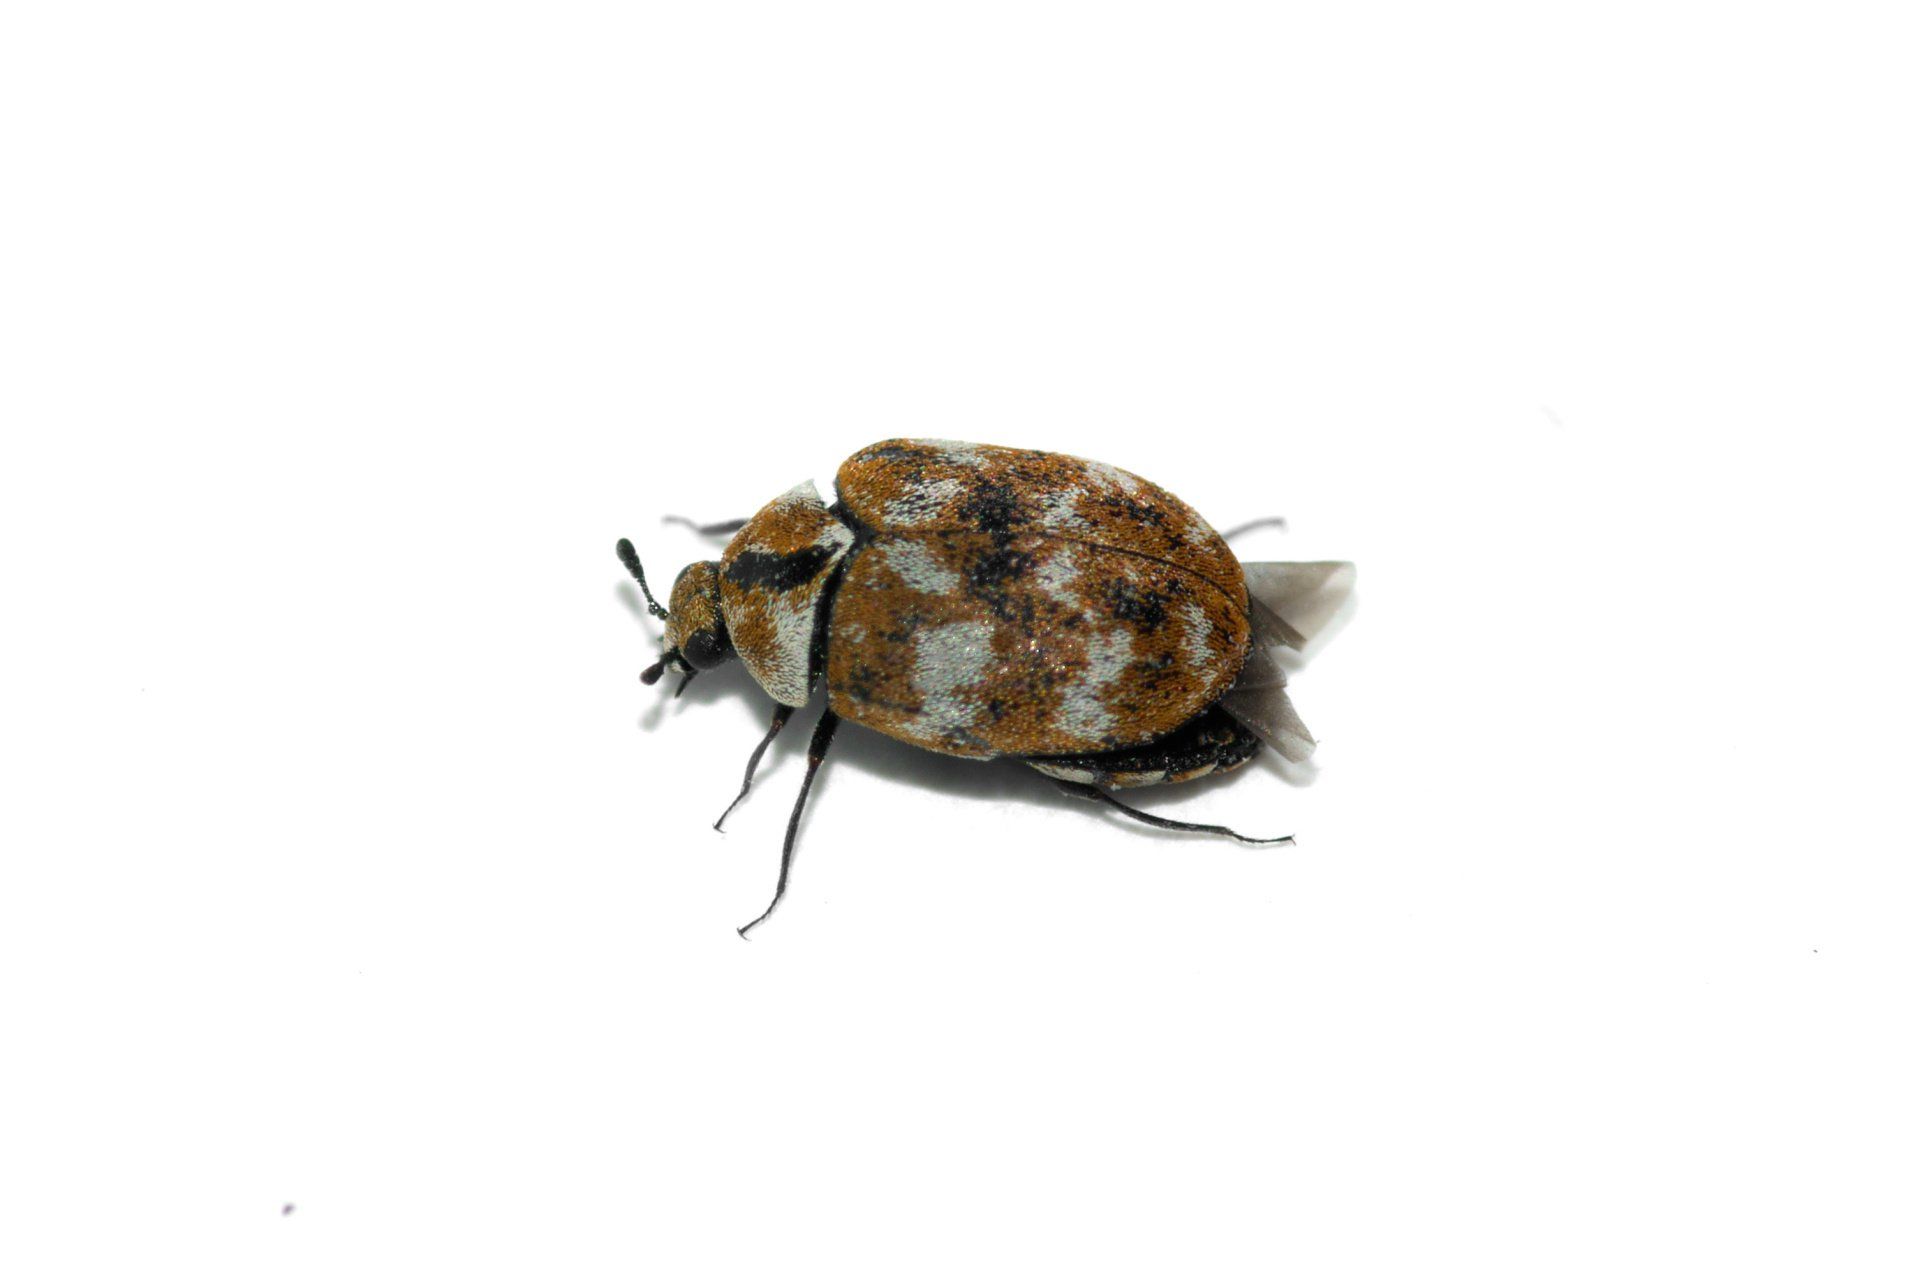 How to Get Rid of Weevils, Organic Pest Control